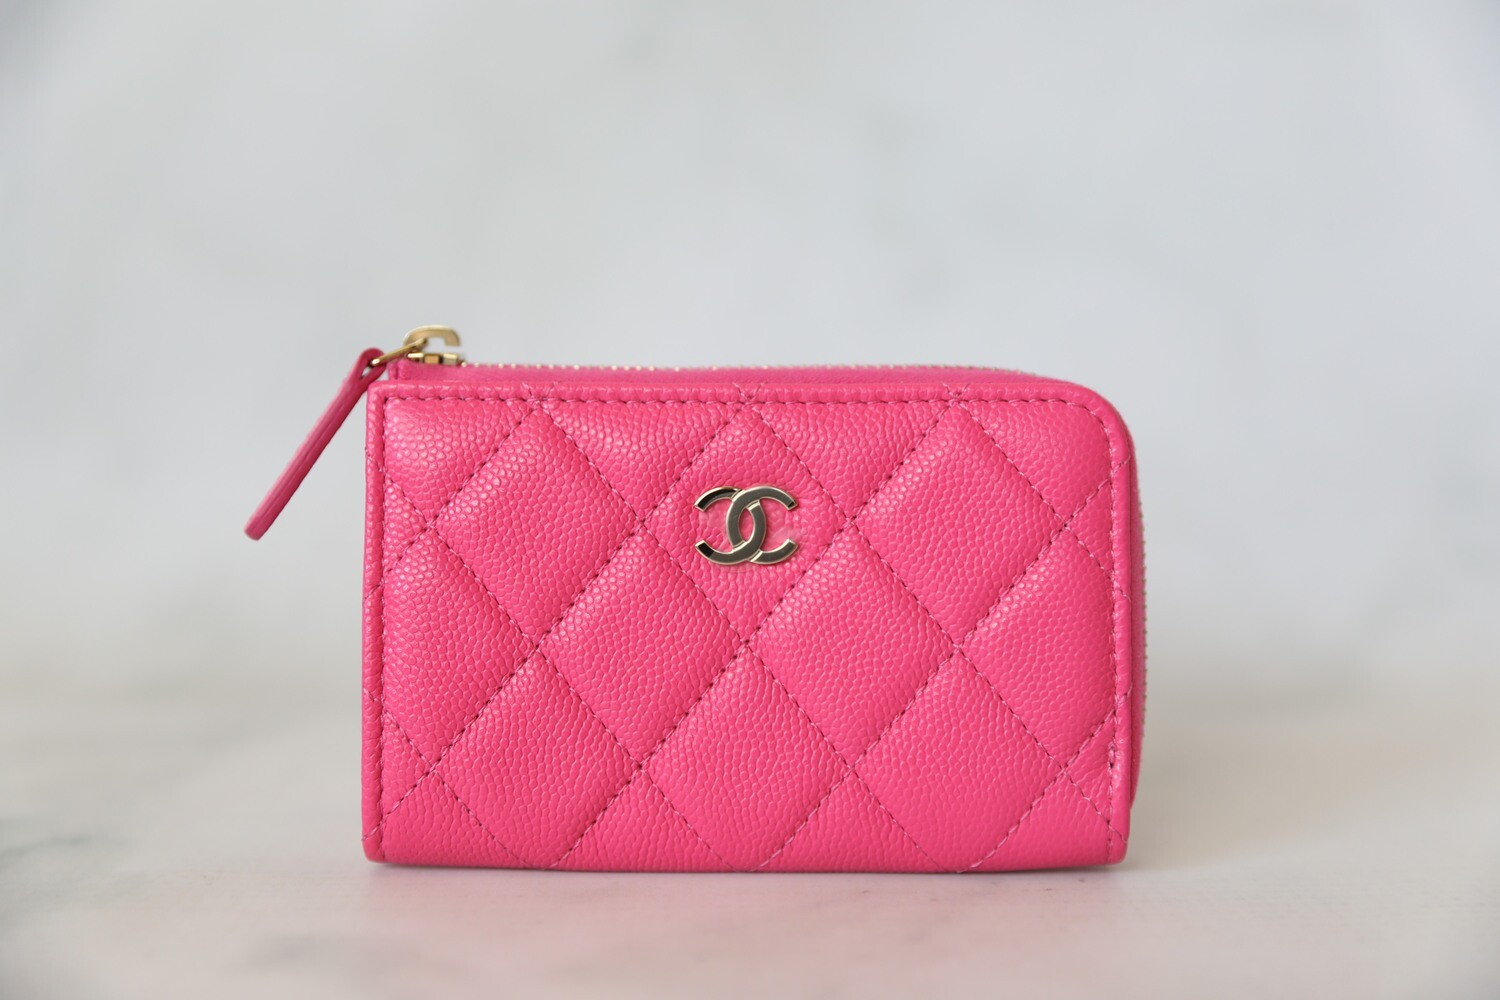 Chanel Zipped Key Holder Case 22K Pink Quilted Caviar Light gold hardware